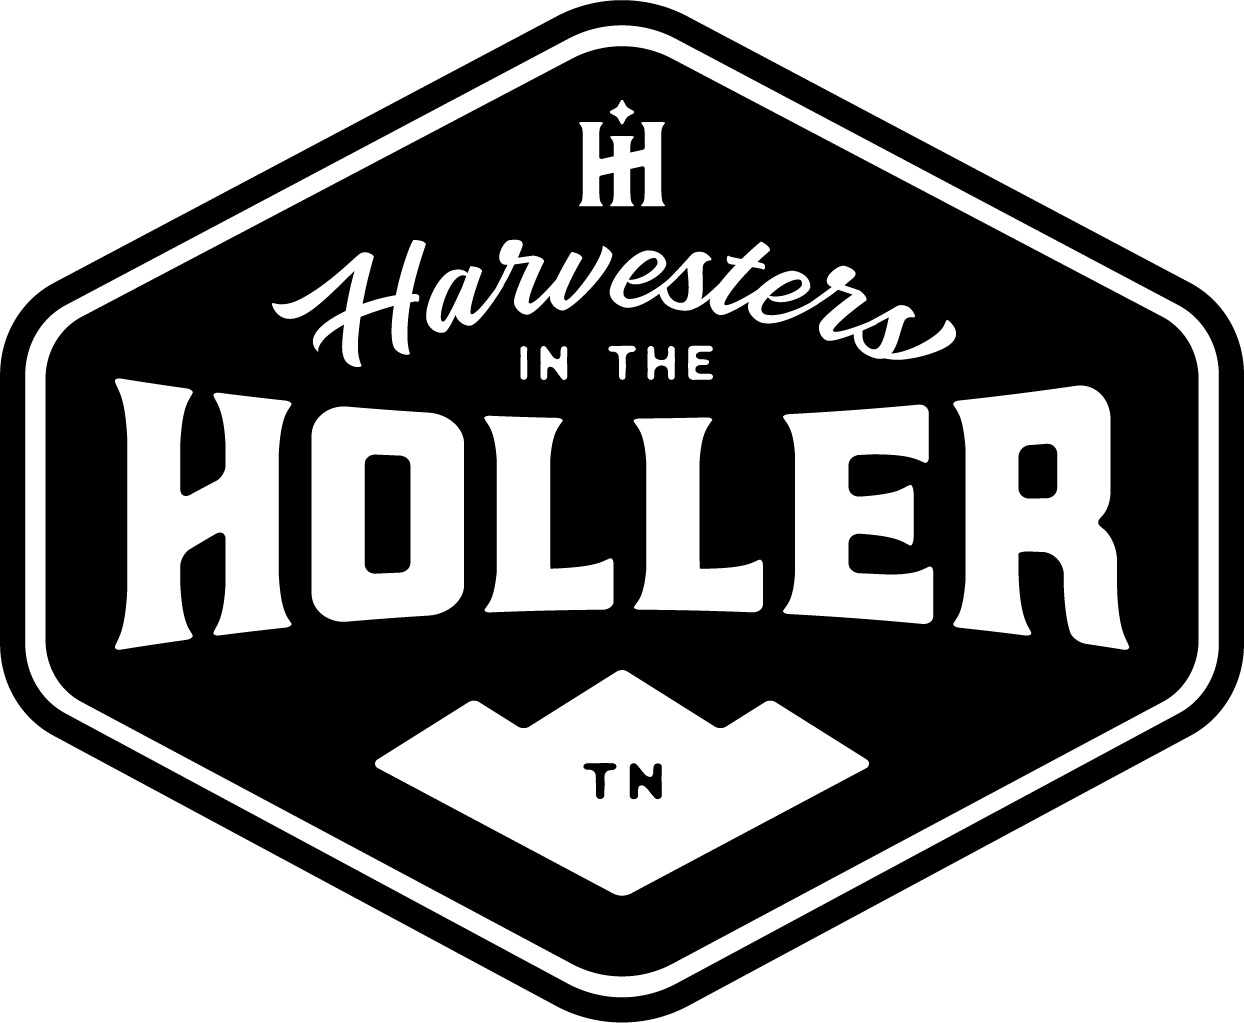 Harvesters in the Holler